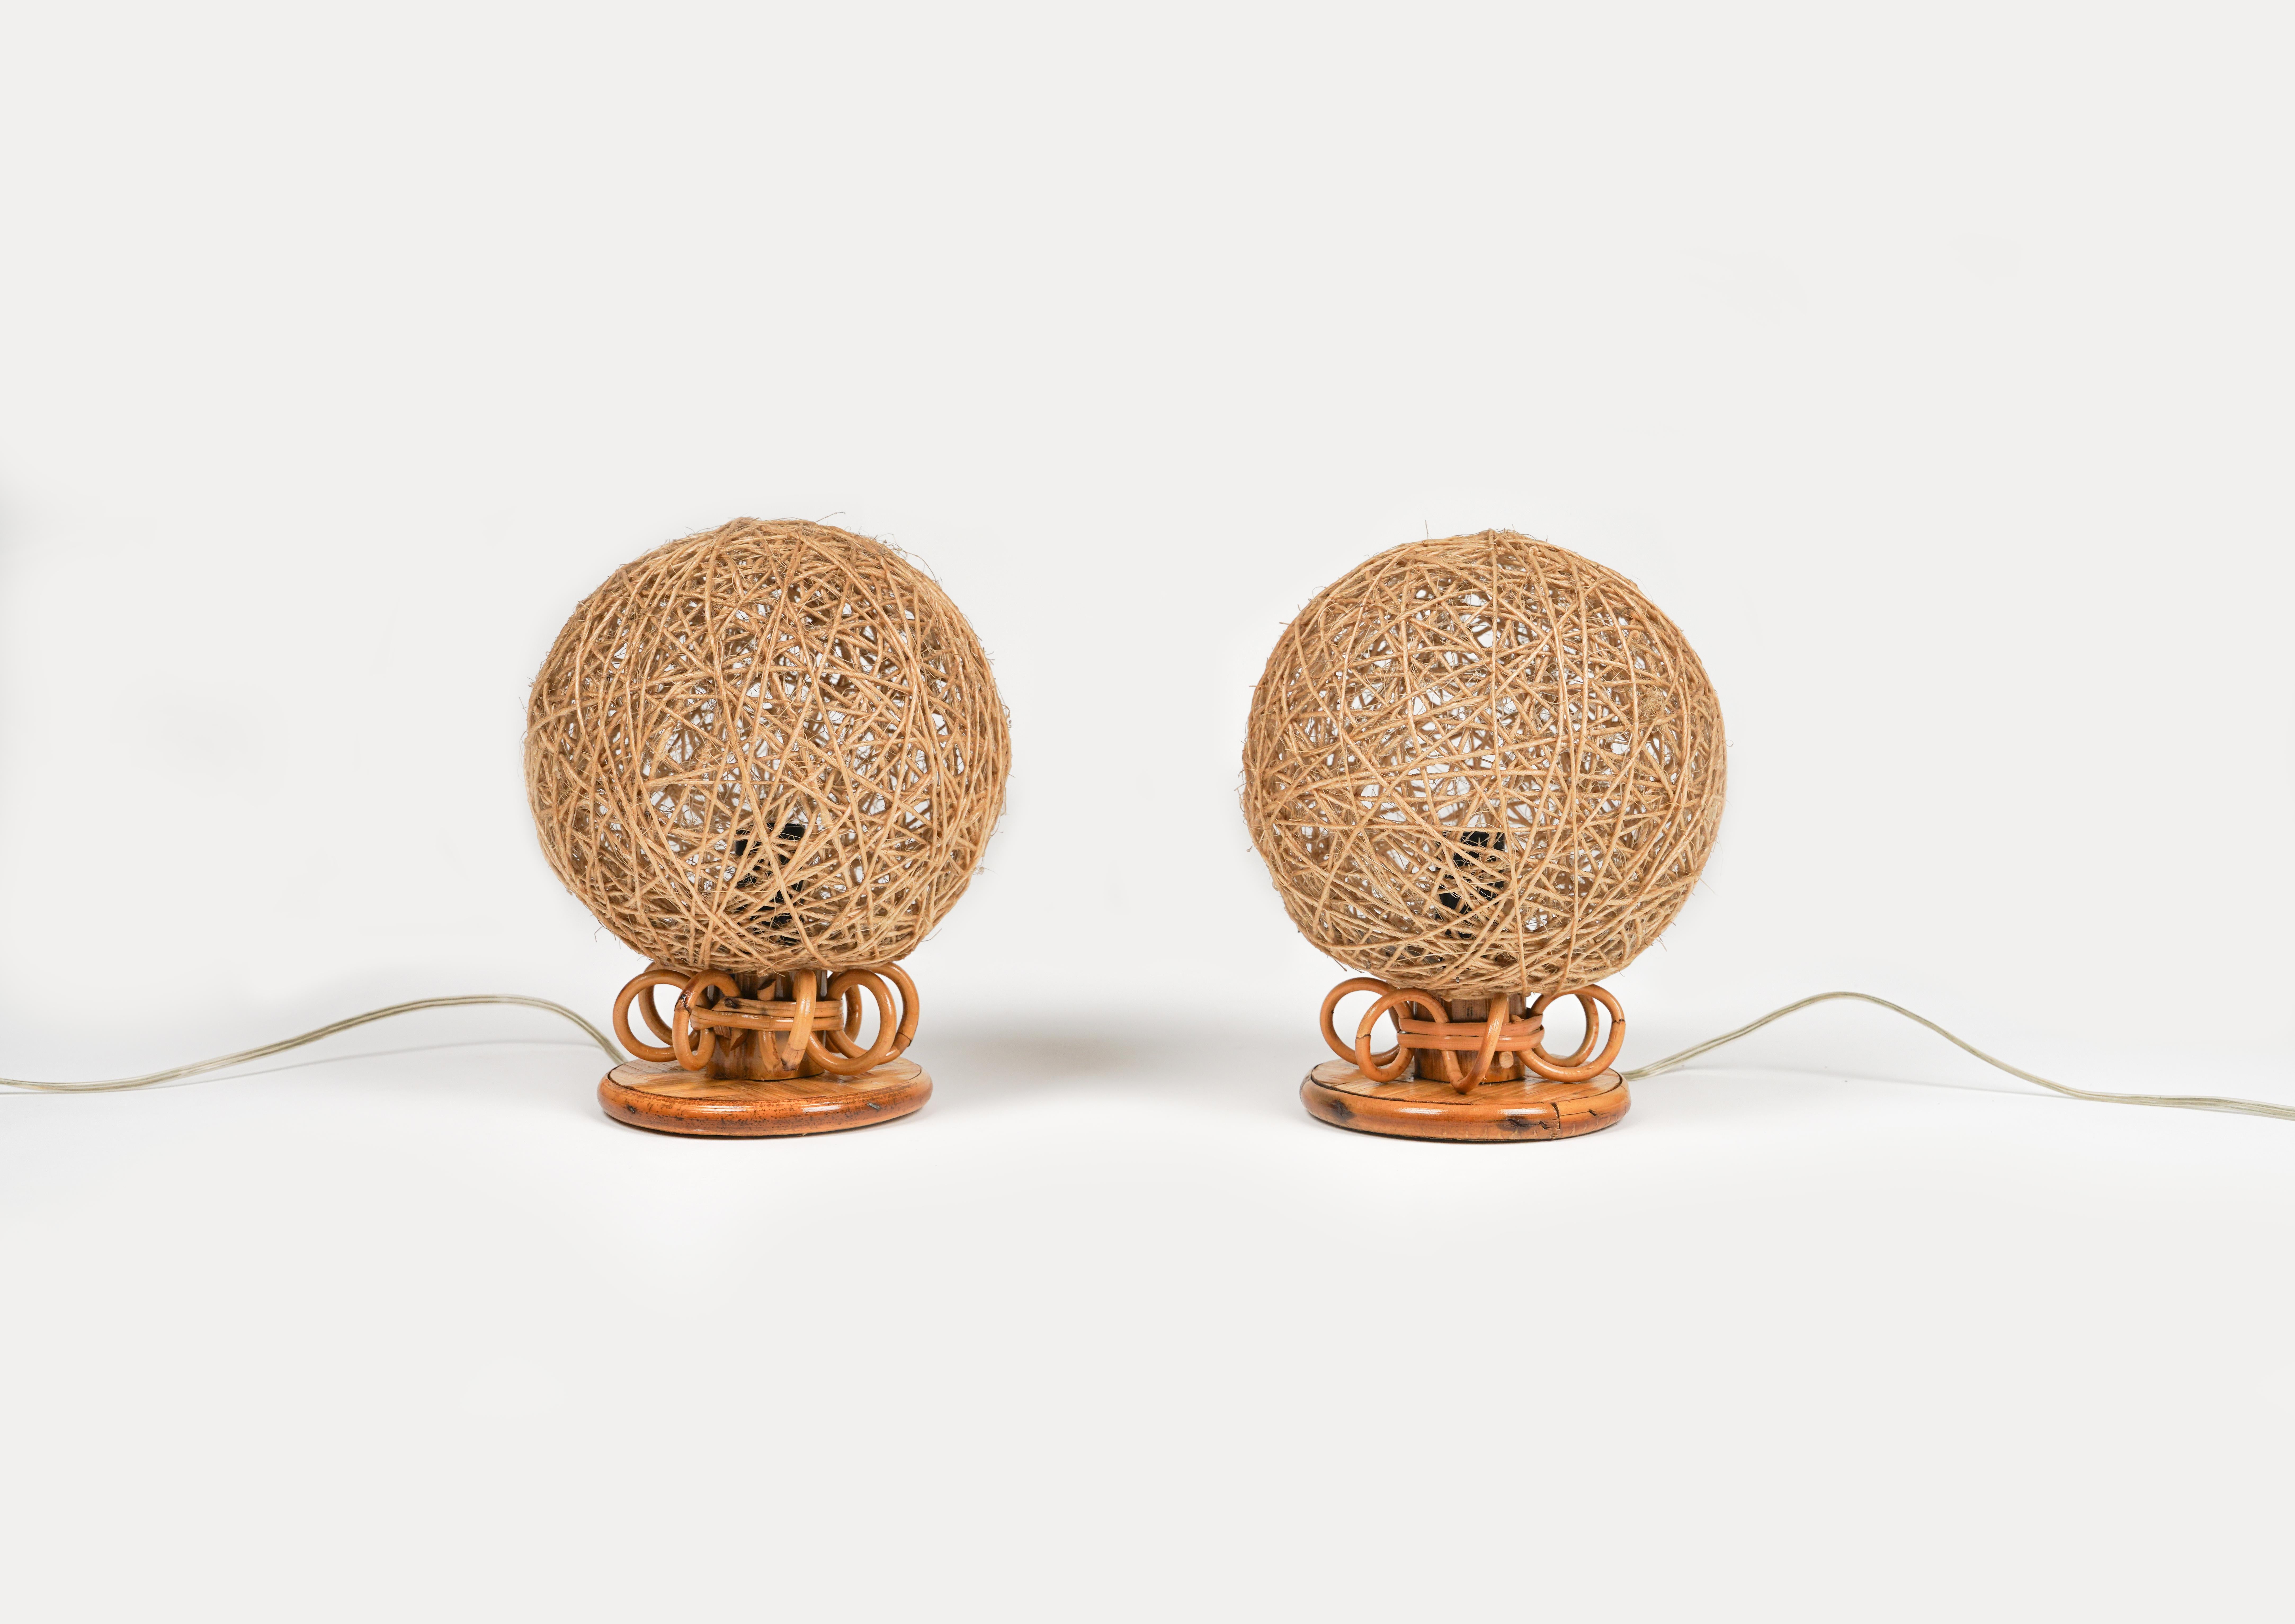 Italian Midcentury Rattan and Rope Pair of Table Lamps, Italy 1970s For Sale